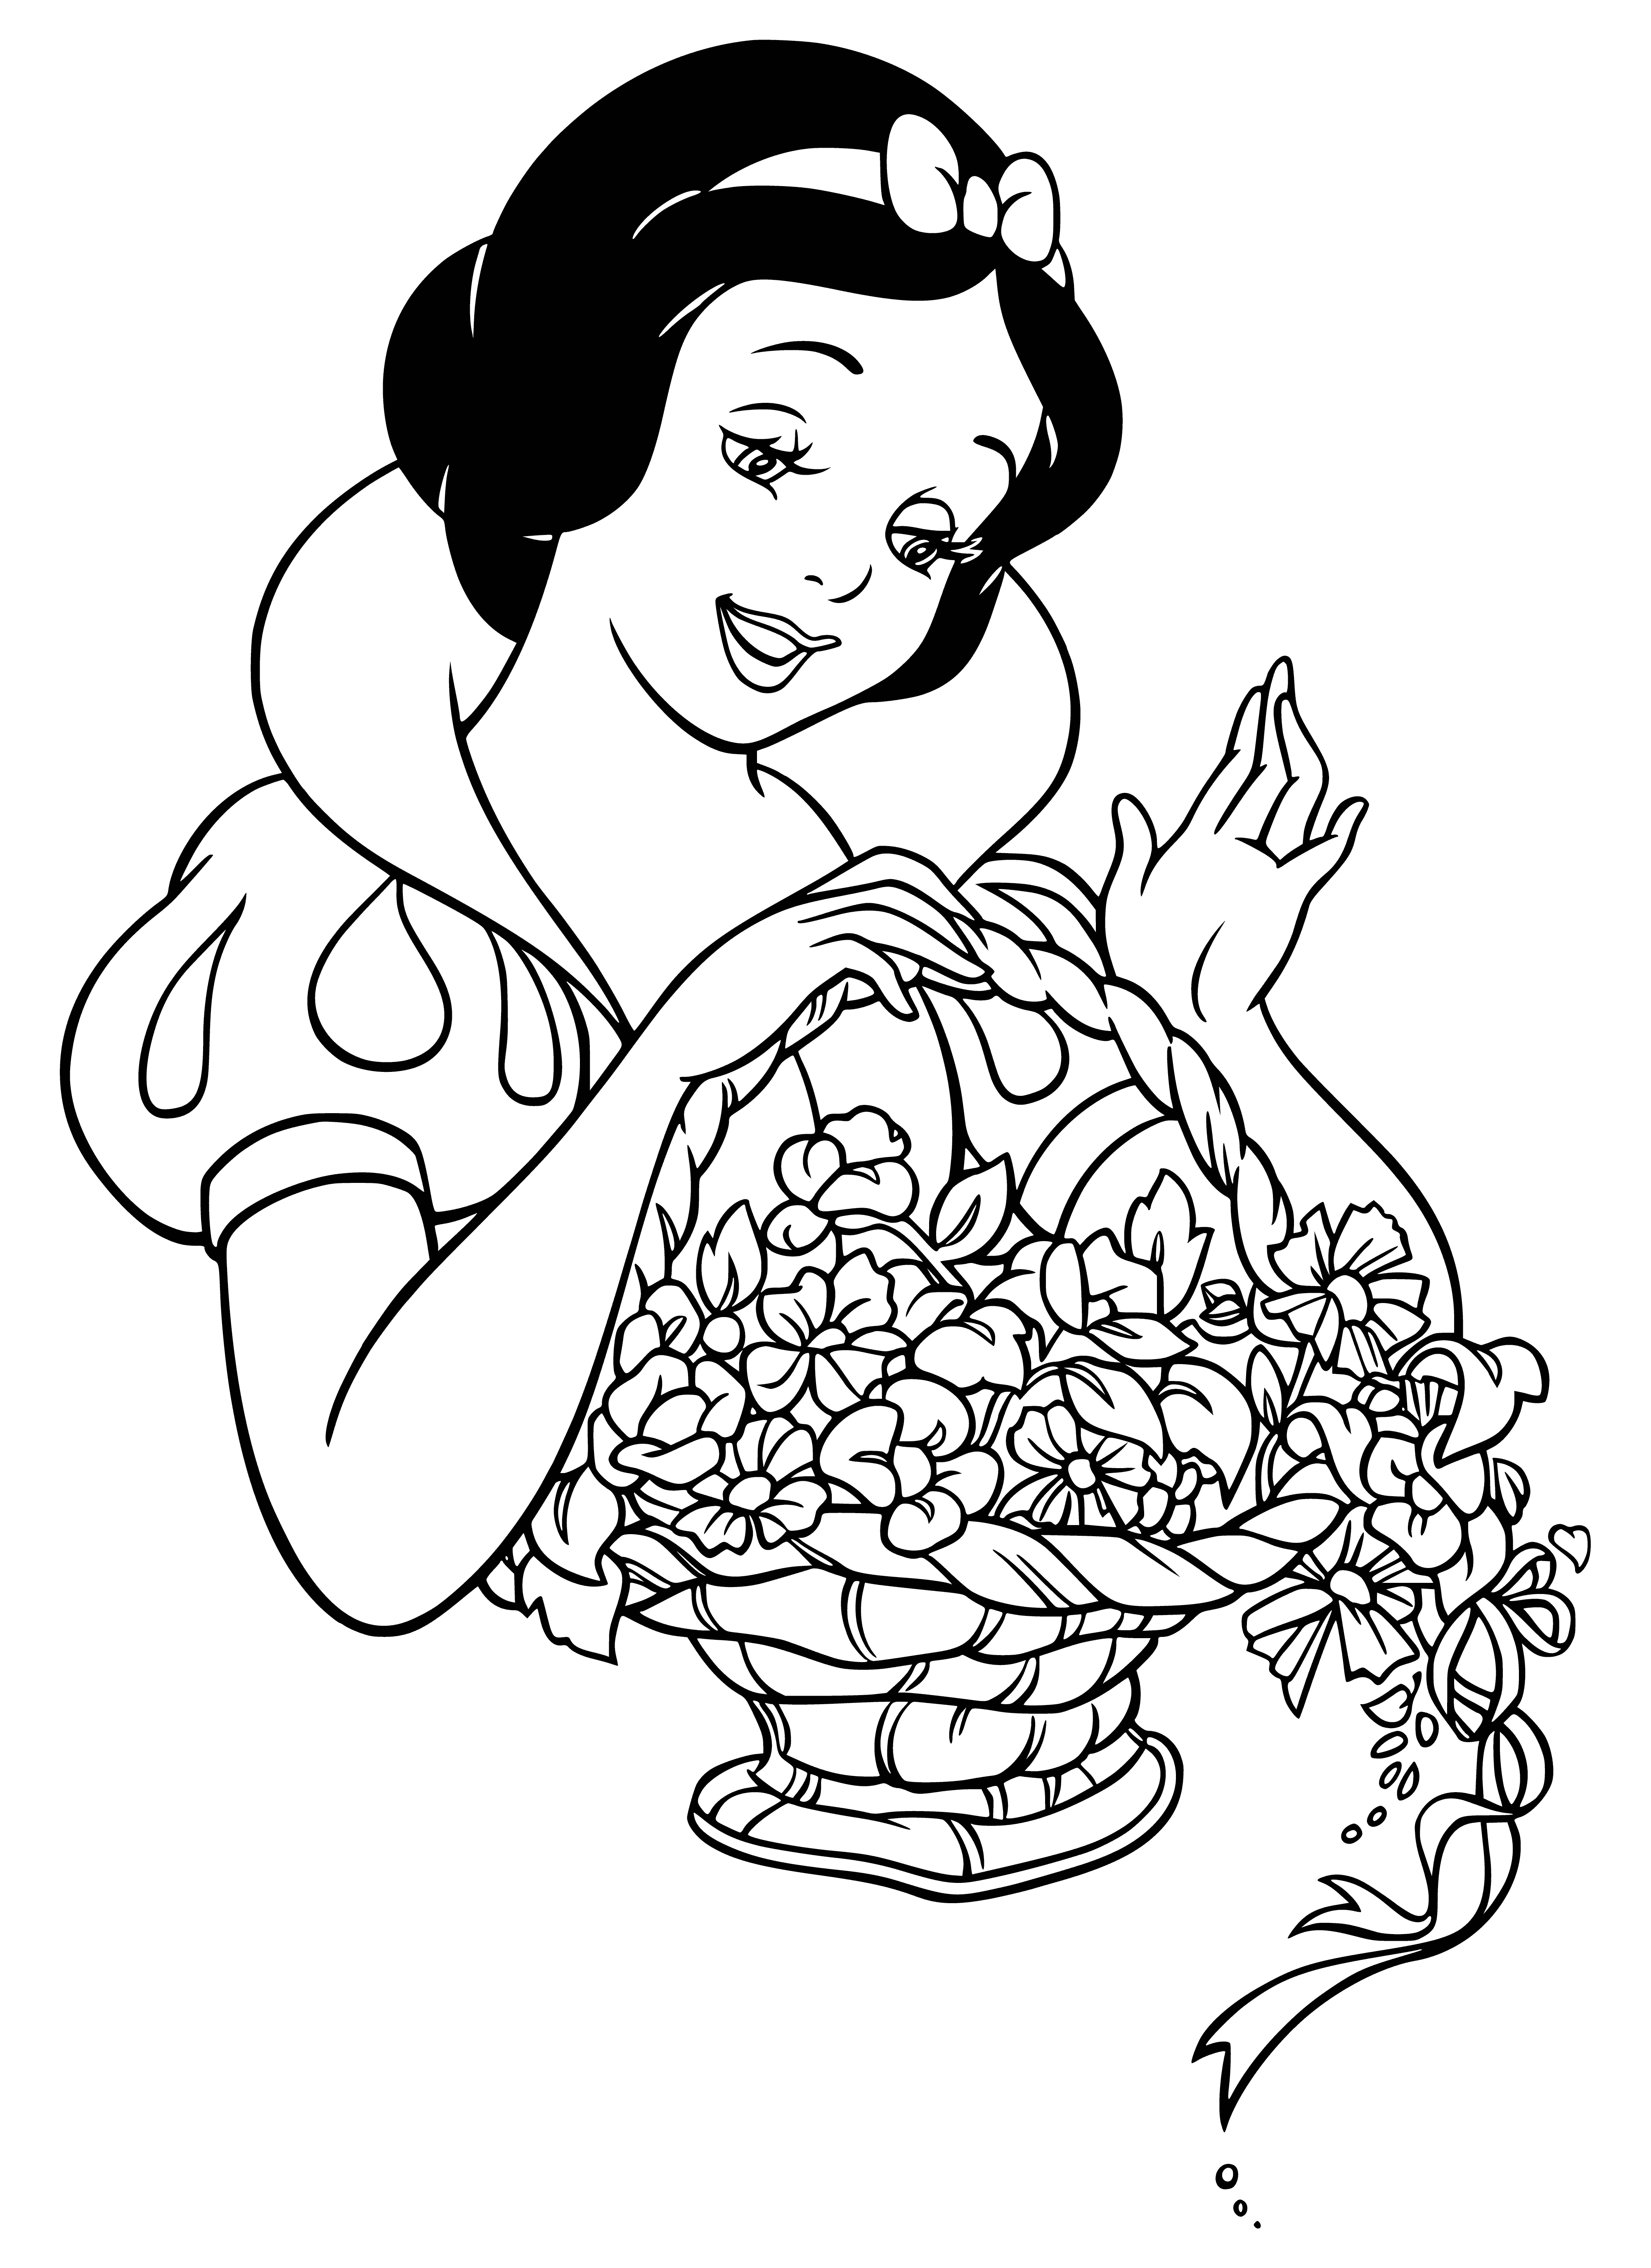 Snow White with a basket of flowers coloring page